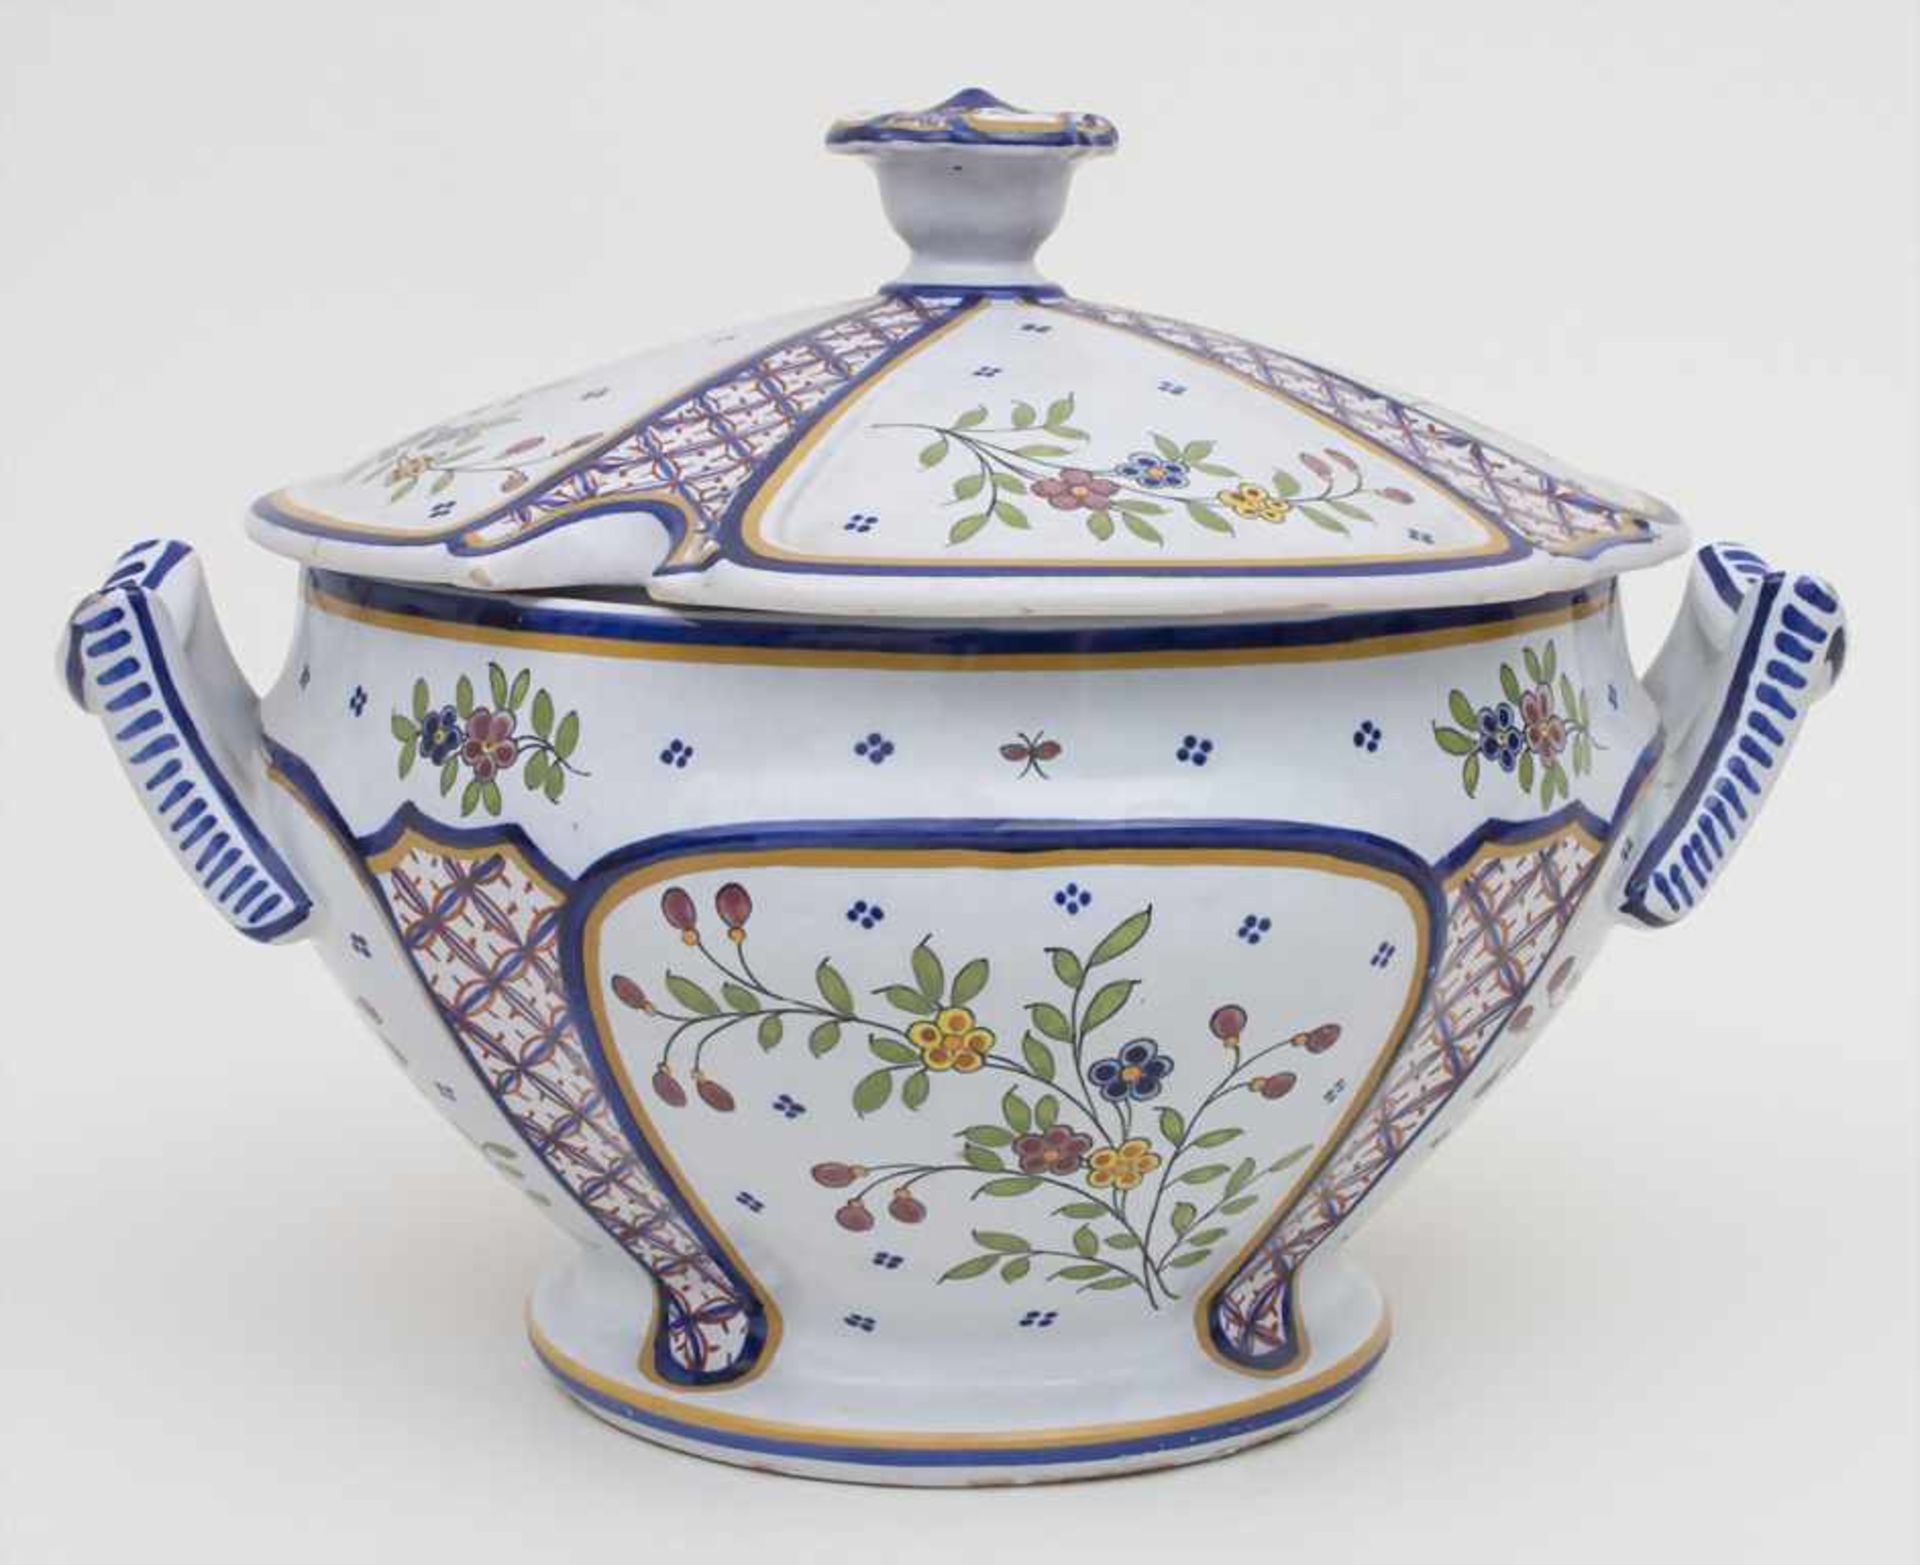 Fayence Deckelterrine / A faience tureen, Quimper, Bretagne, Frankreich, 20. Jh.Material: Fayence, - Image 3 of 9